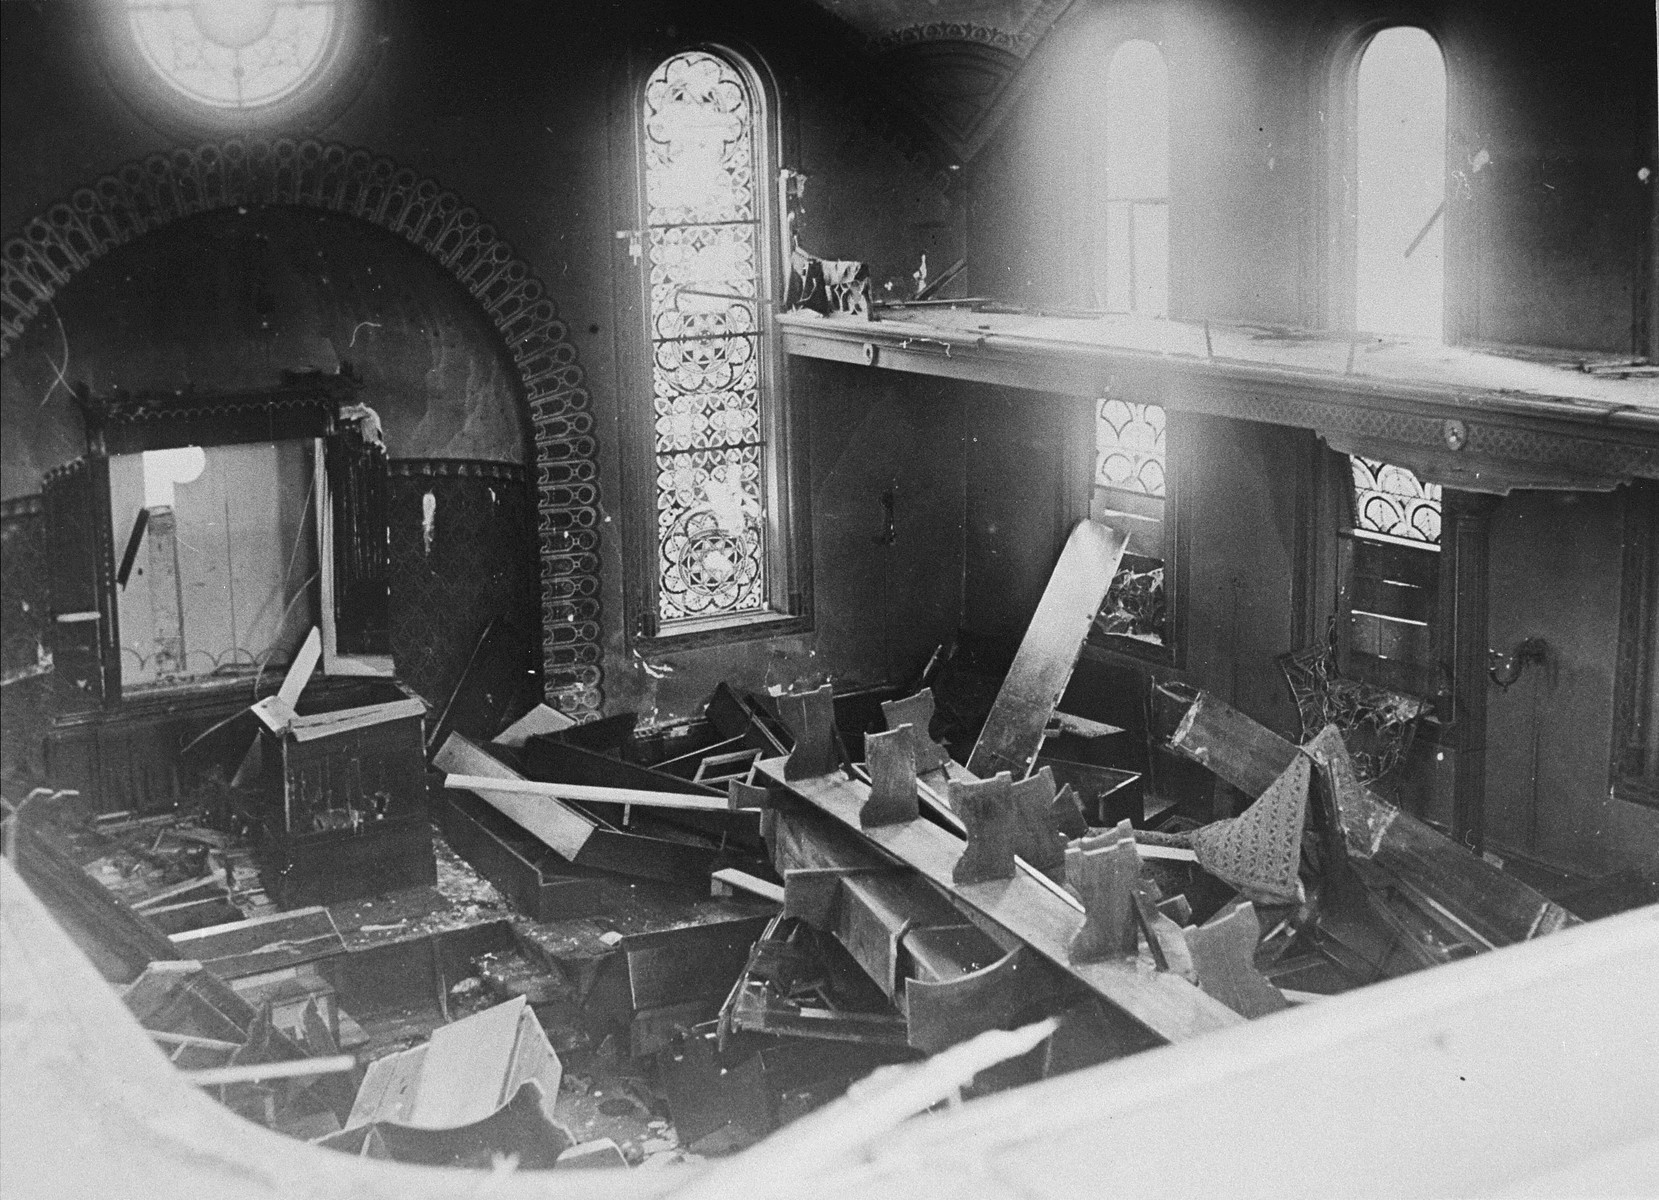 View of the destroyed interior of the Hechingen synagogue the day after Kristallnacht.